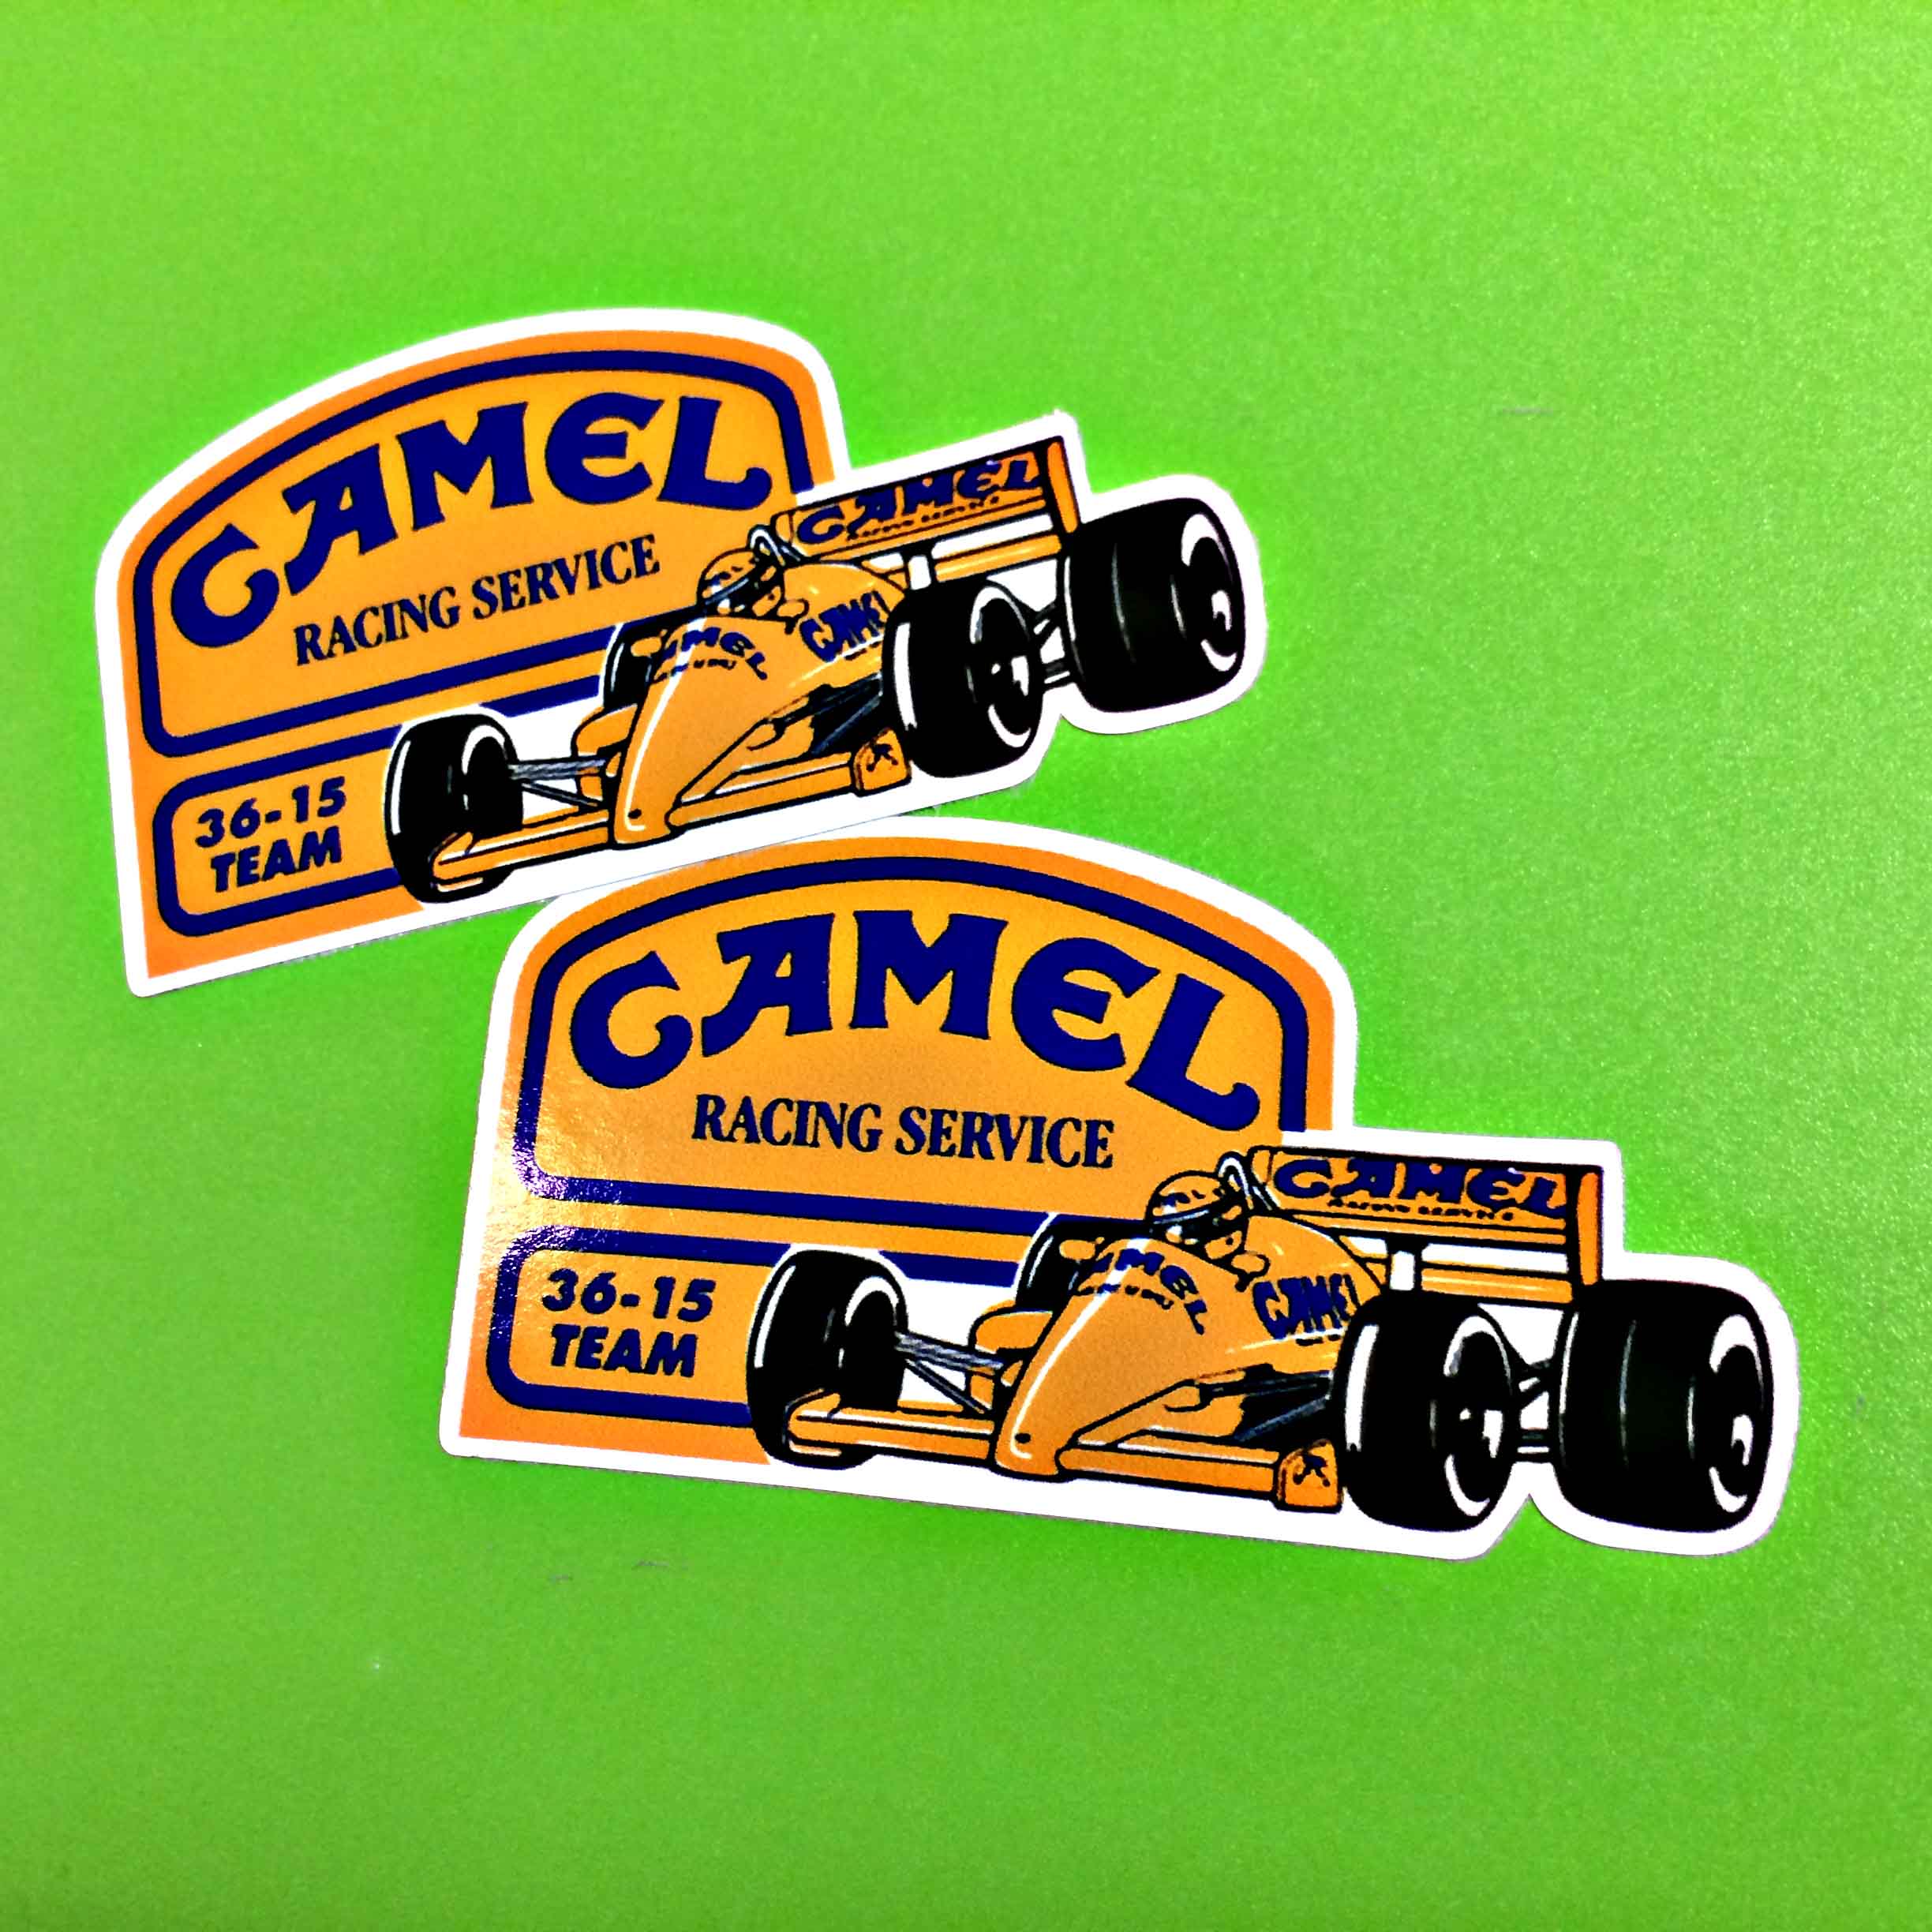 Camel Racing Service in blue lettering on a yellow background with a blue border; 36-15 Team in blue on a yellow background with a blue border next to a yellow F1 racing car with Camel logos on it in blue.